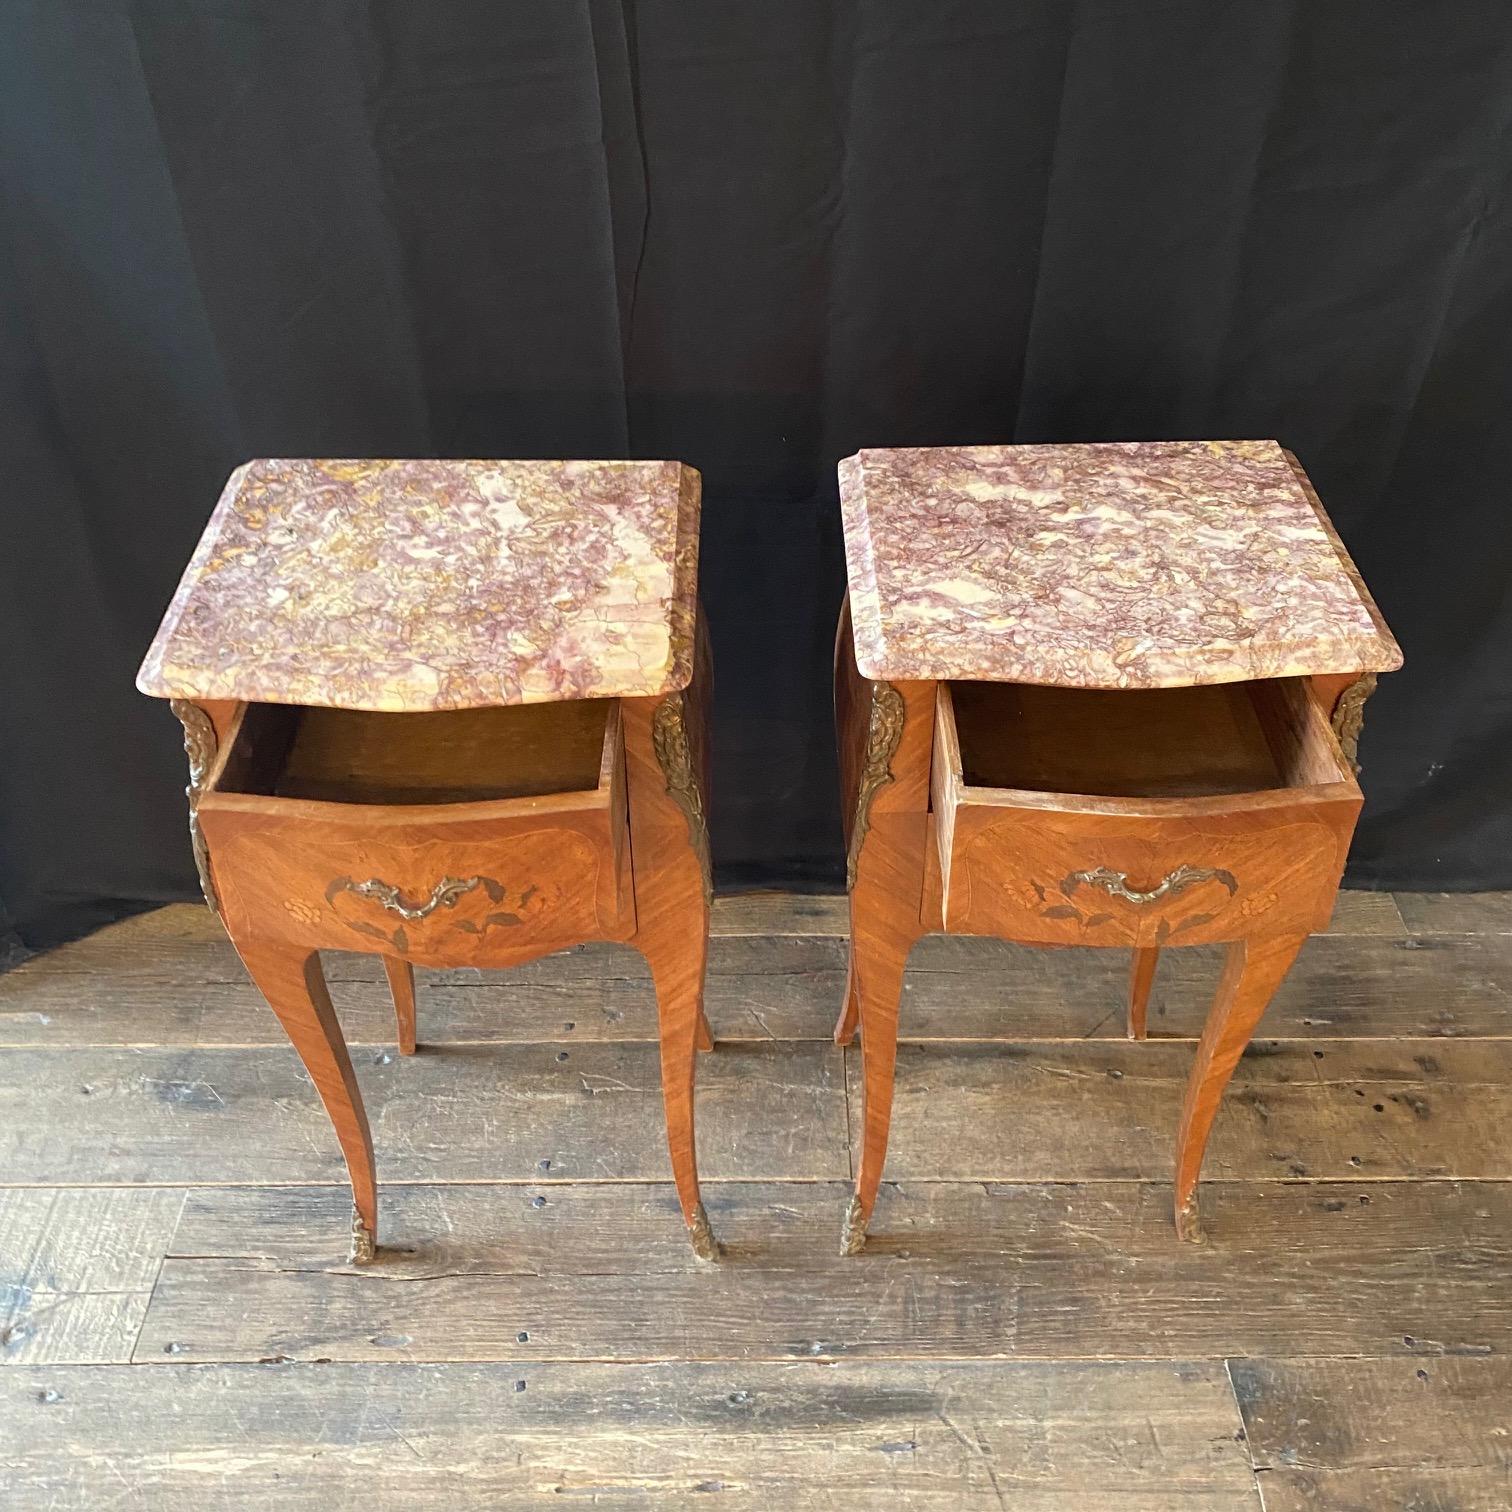 Antique Louis XV French marquetry marble night stands, side tables or bedside tables. Beautiful walnut and fruitwood, having serpentine marble tops above two inlaid and dovetailed floral drawers fitted with original brass handles and flanked by